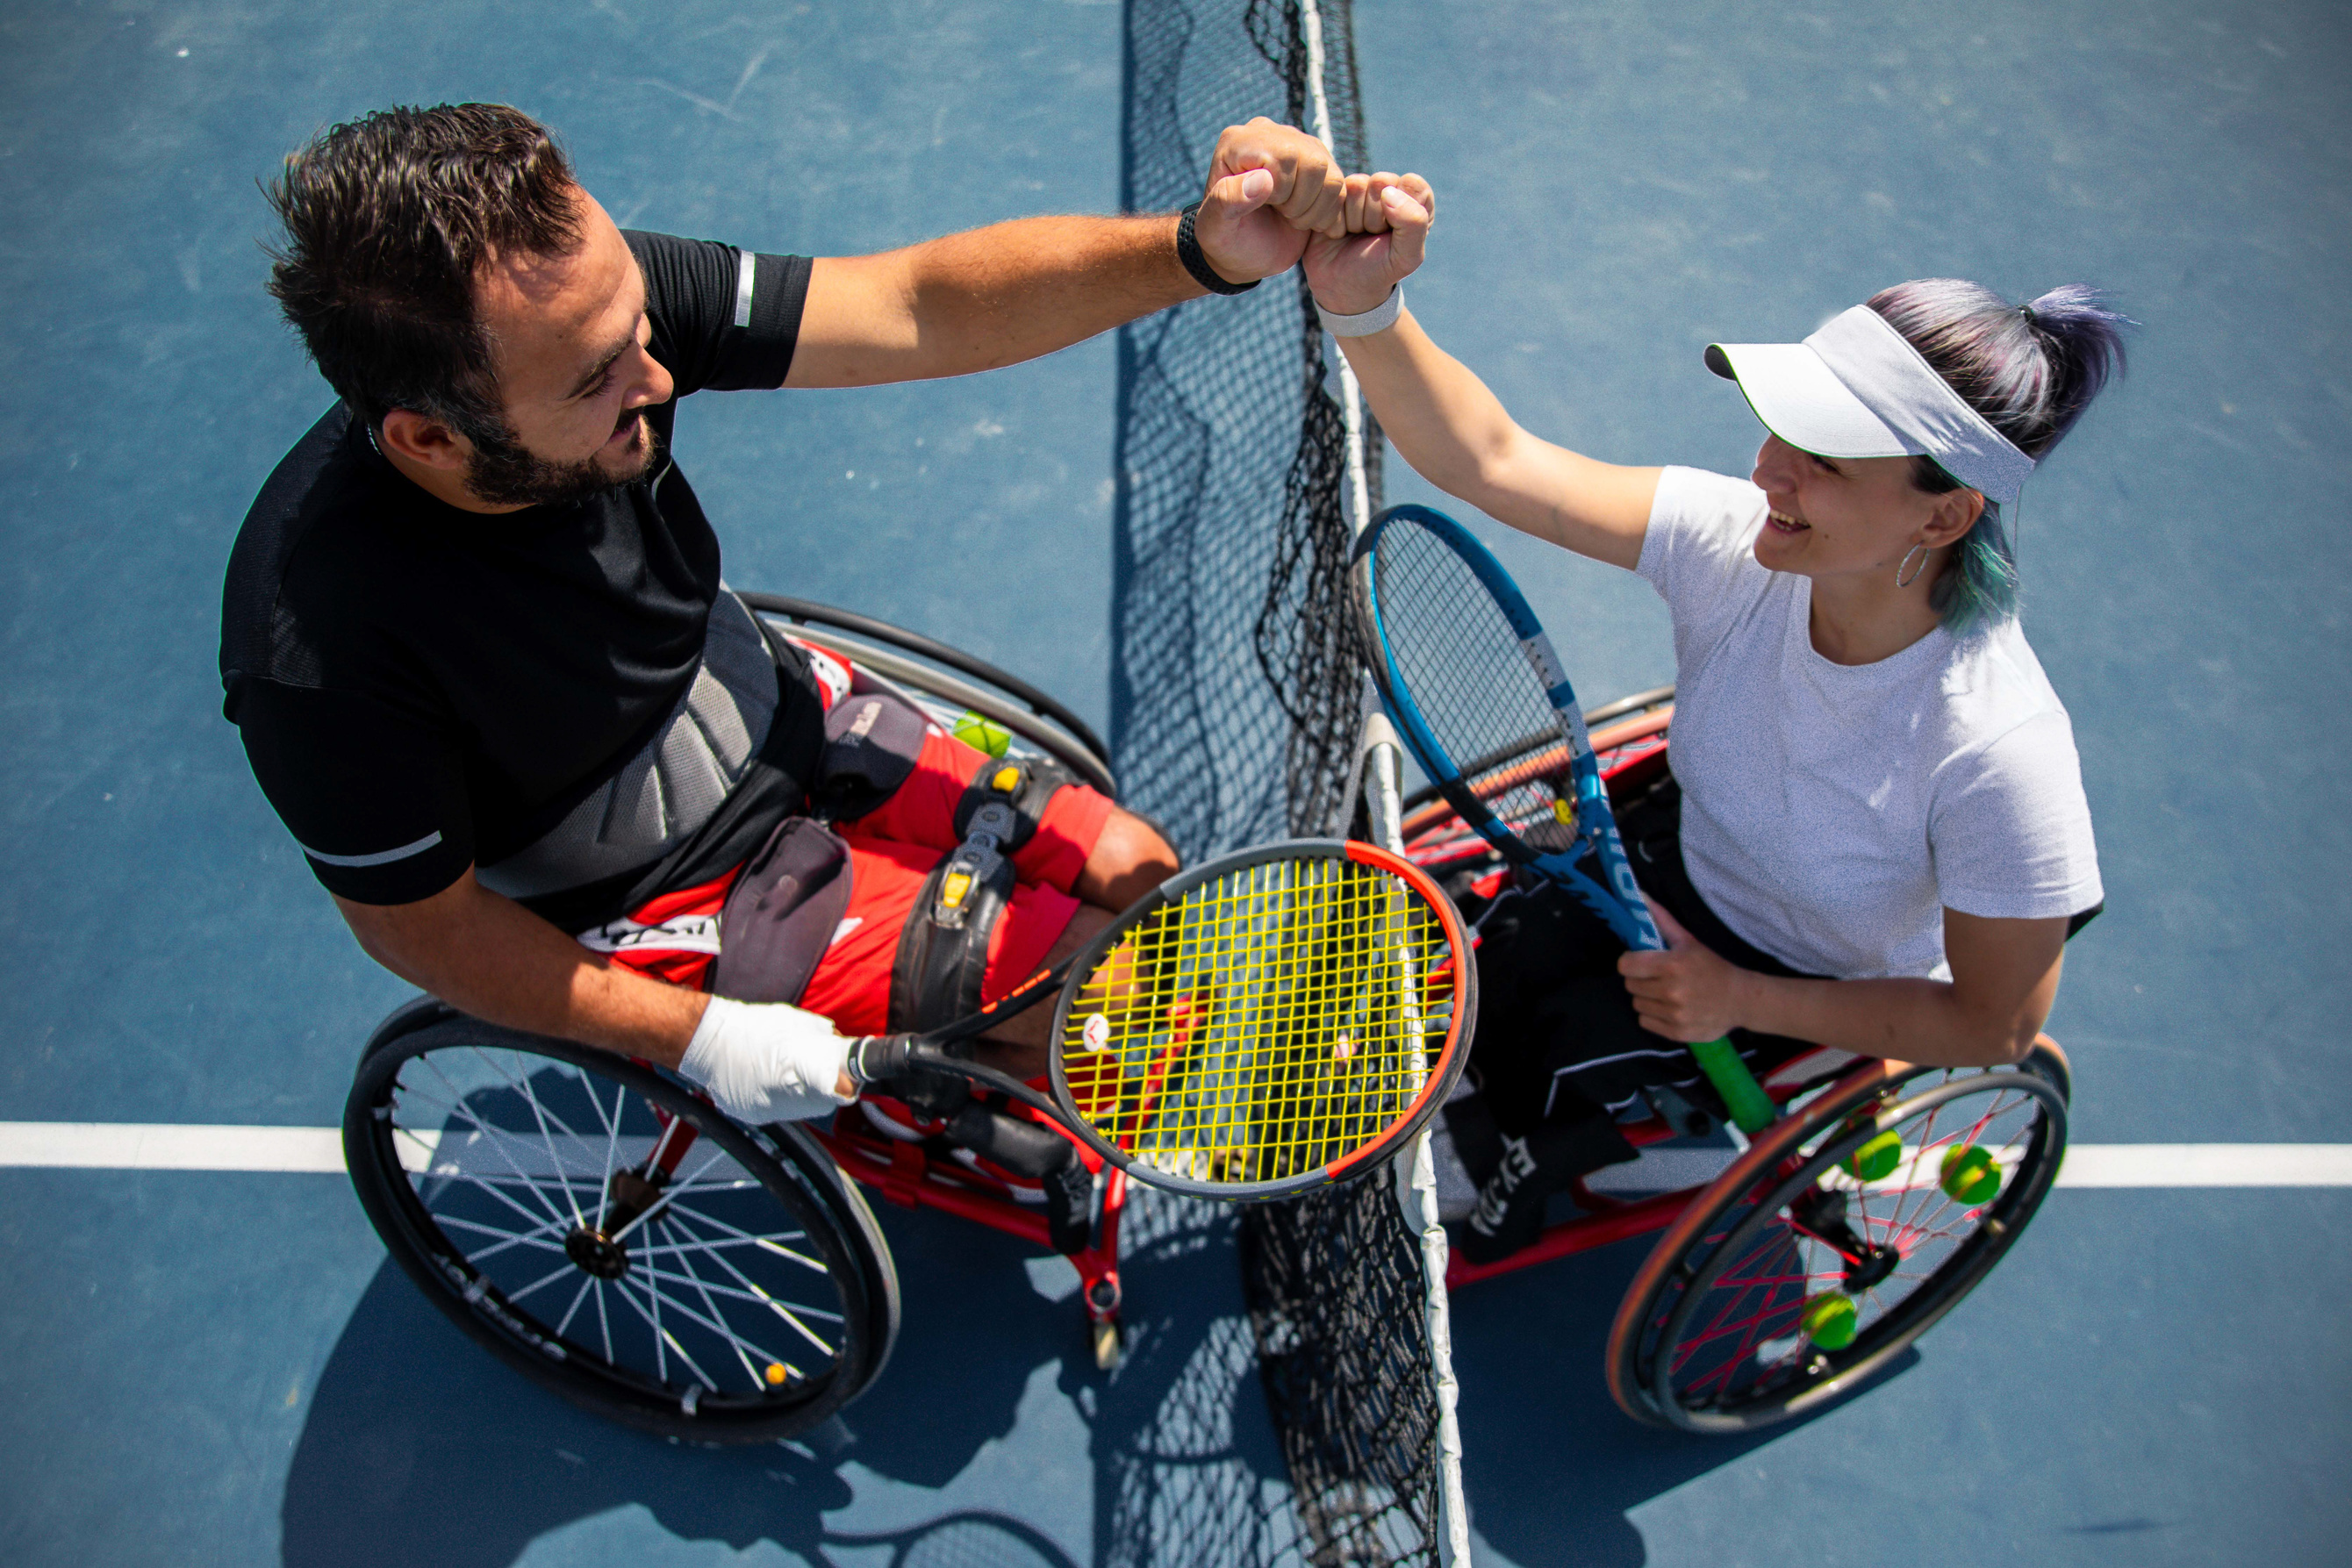 Persons with Disabilities Doing Fist Bump After Tennis Match